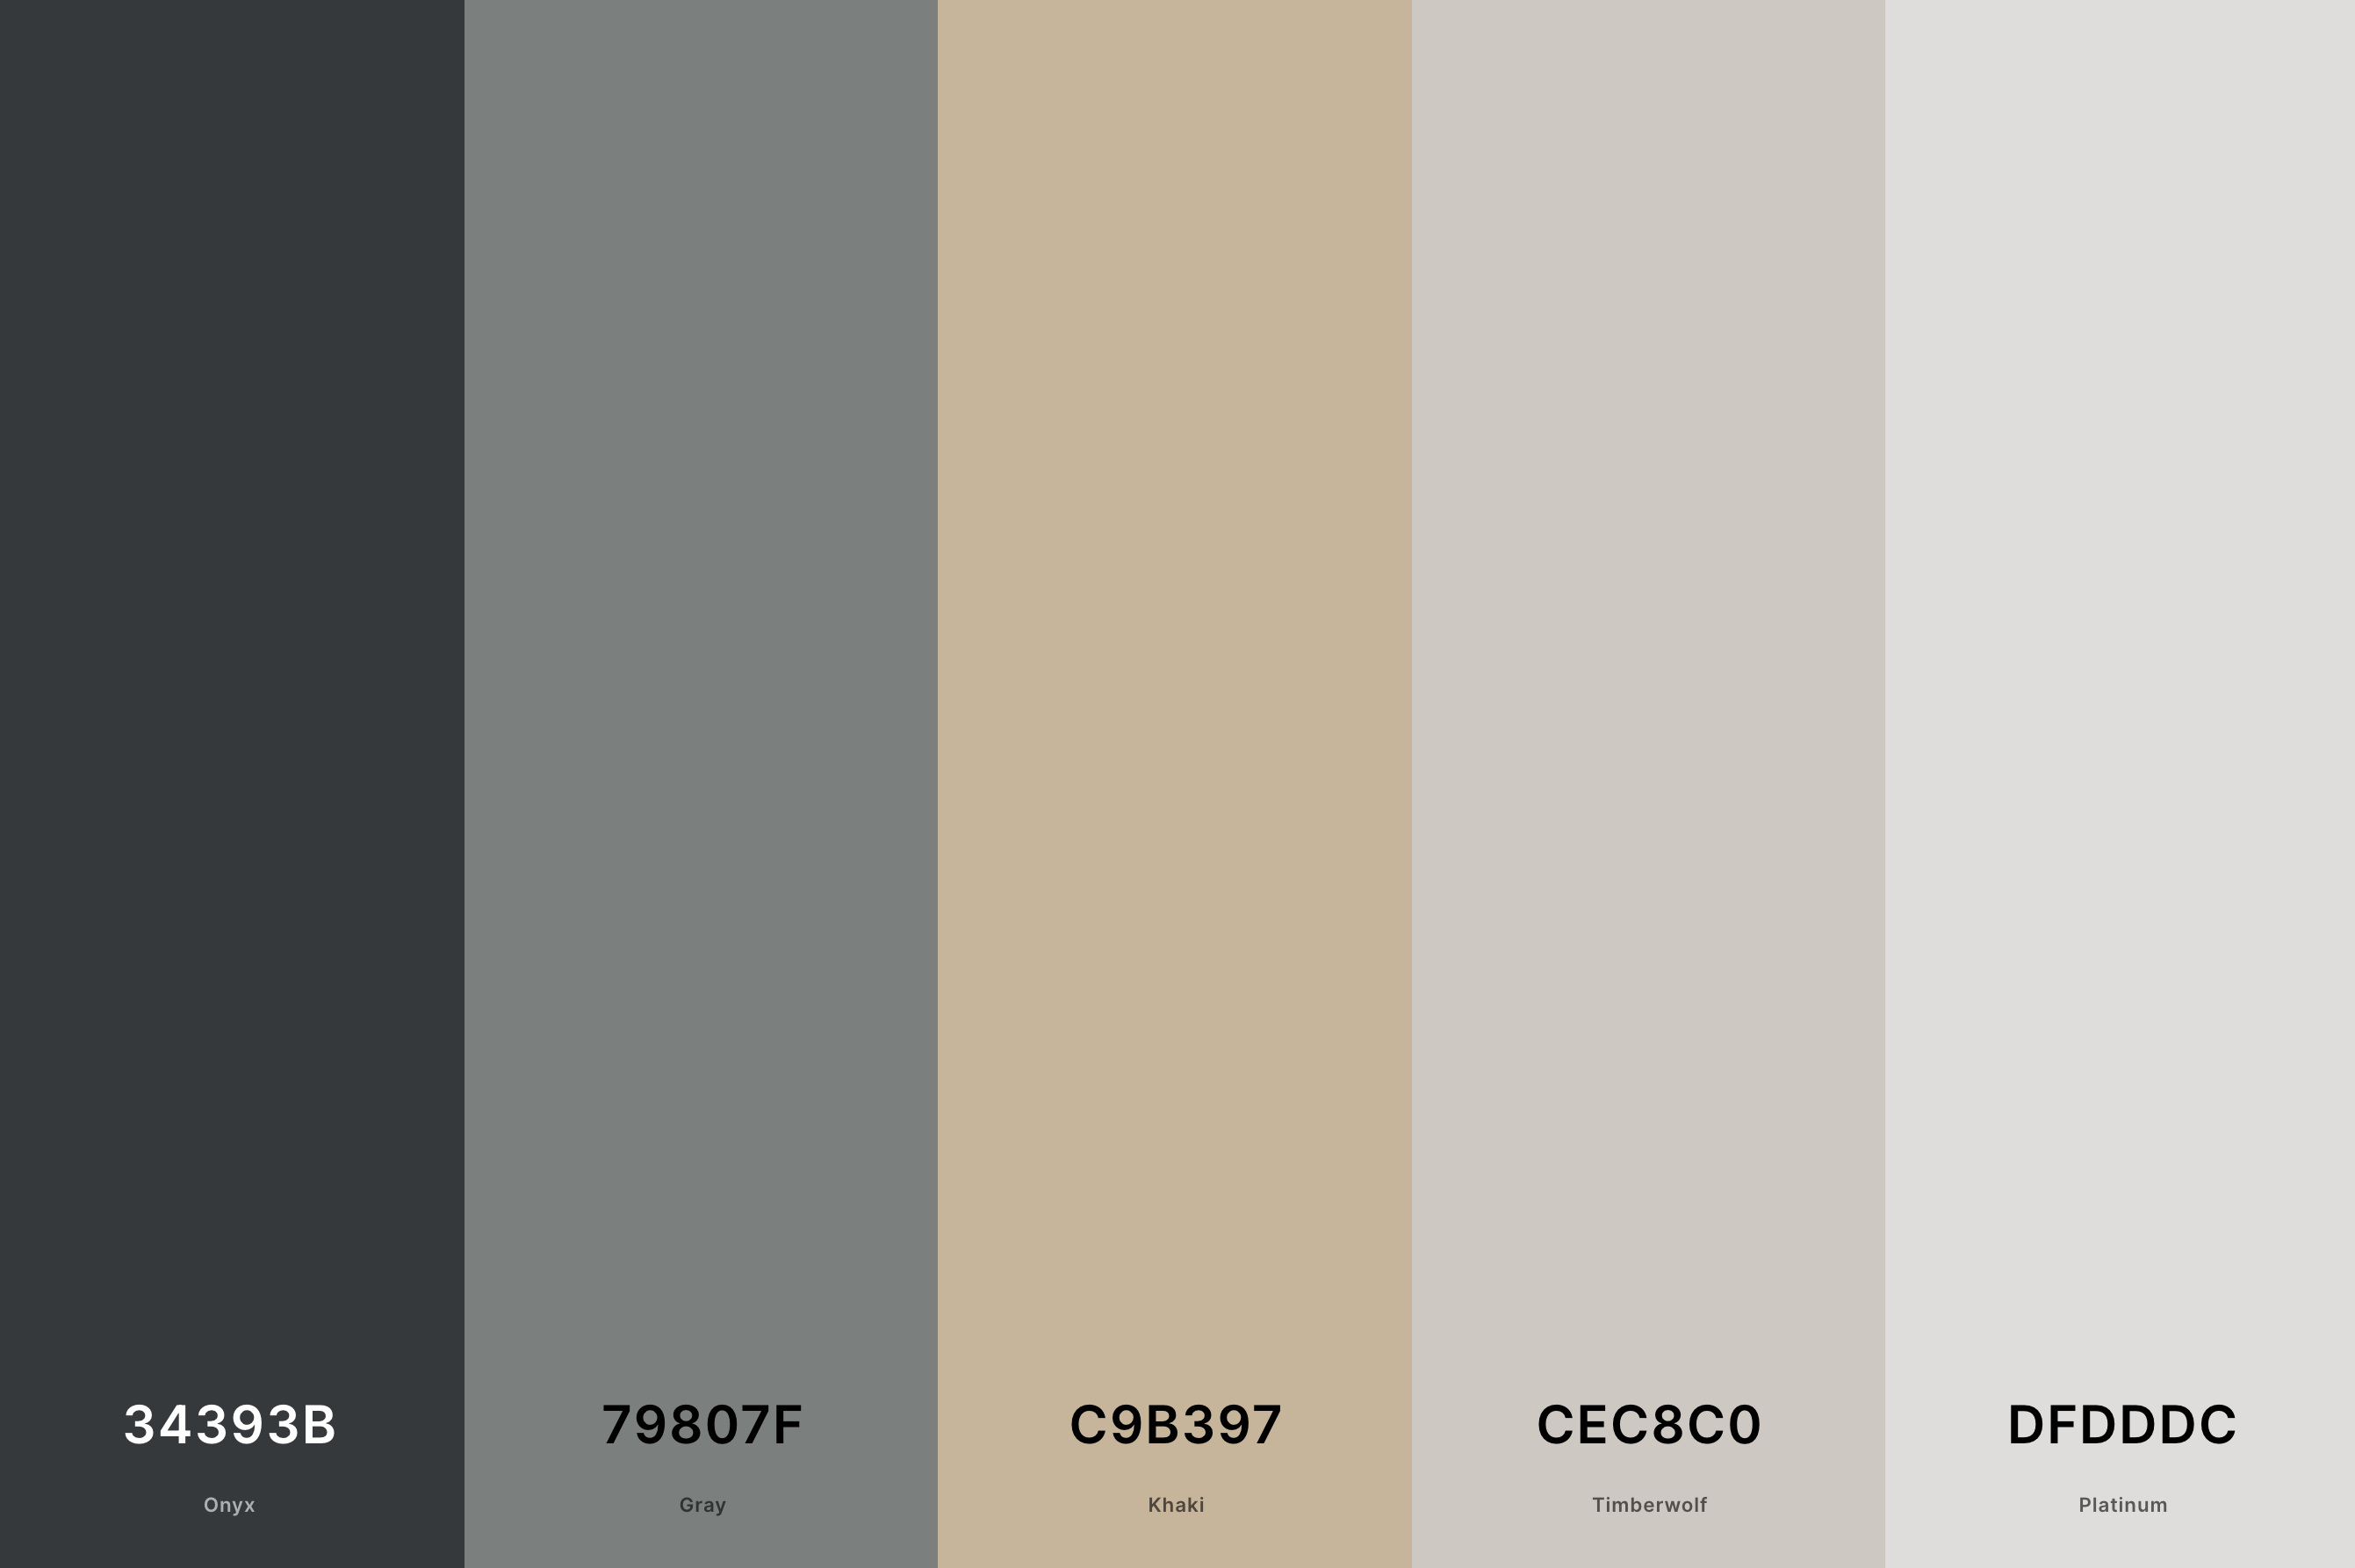 7. Blue, Grey Tan Color Palette Color Palette with Onyx (Hex #34393B) + Gray (Hex #79807F) + Khaki (Hex #C9B397) + Timberwolf (Hex #CEC8C0) + Platinum (Hex #DFDDDC) Color Palette with Hex Codes